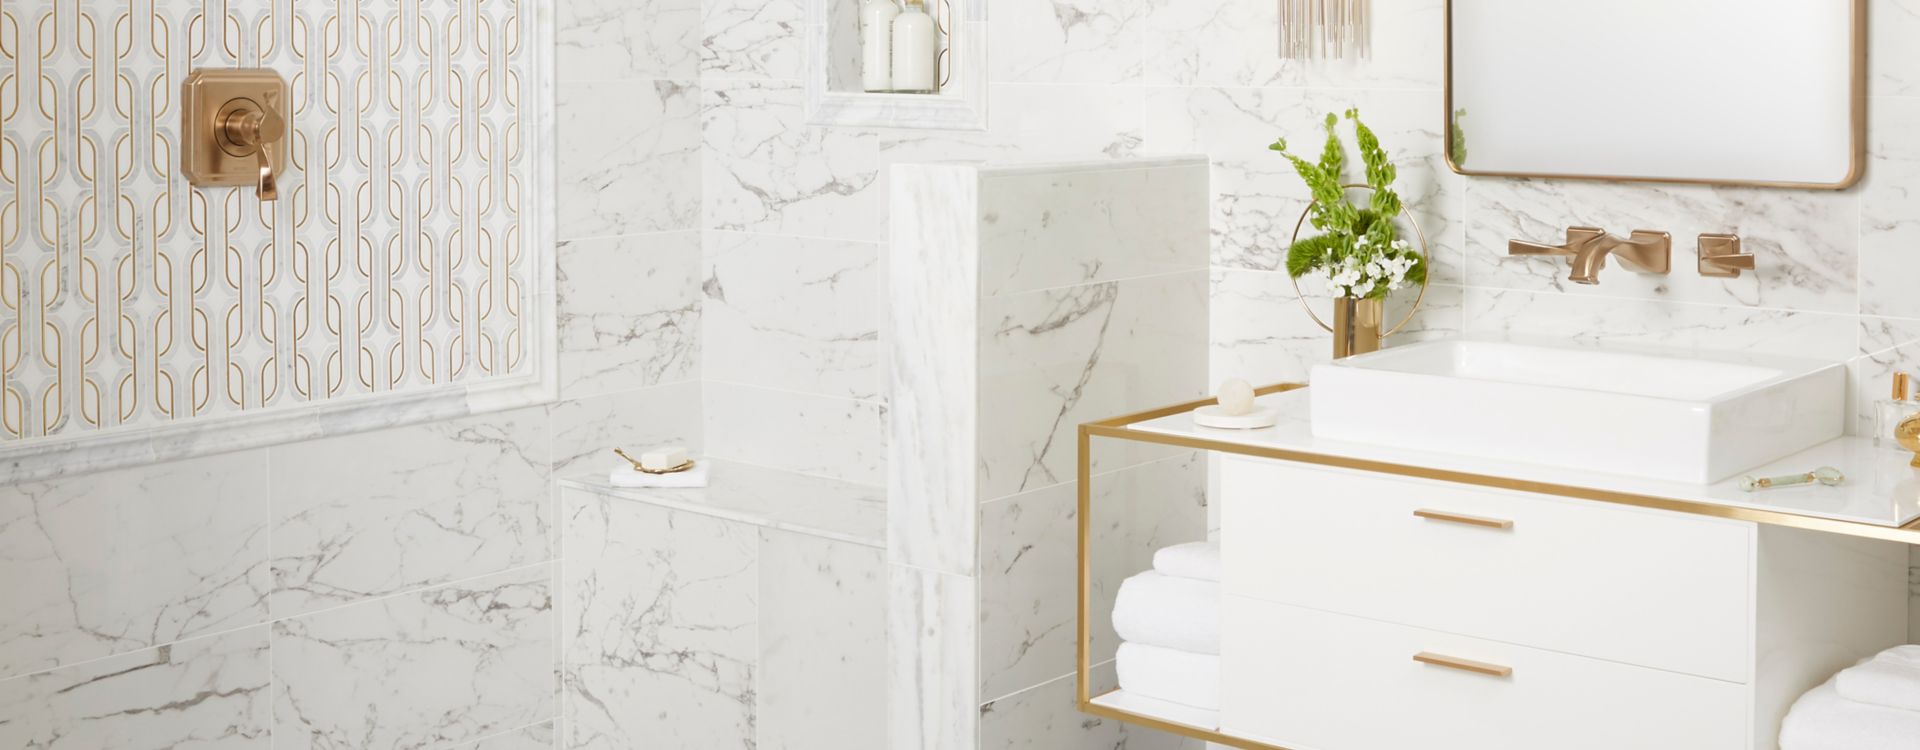 Glamorous bathroom with white marble and gold accents.